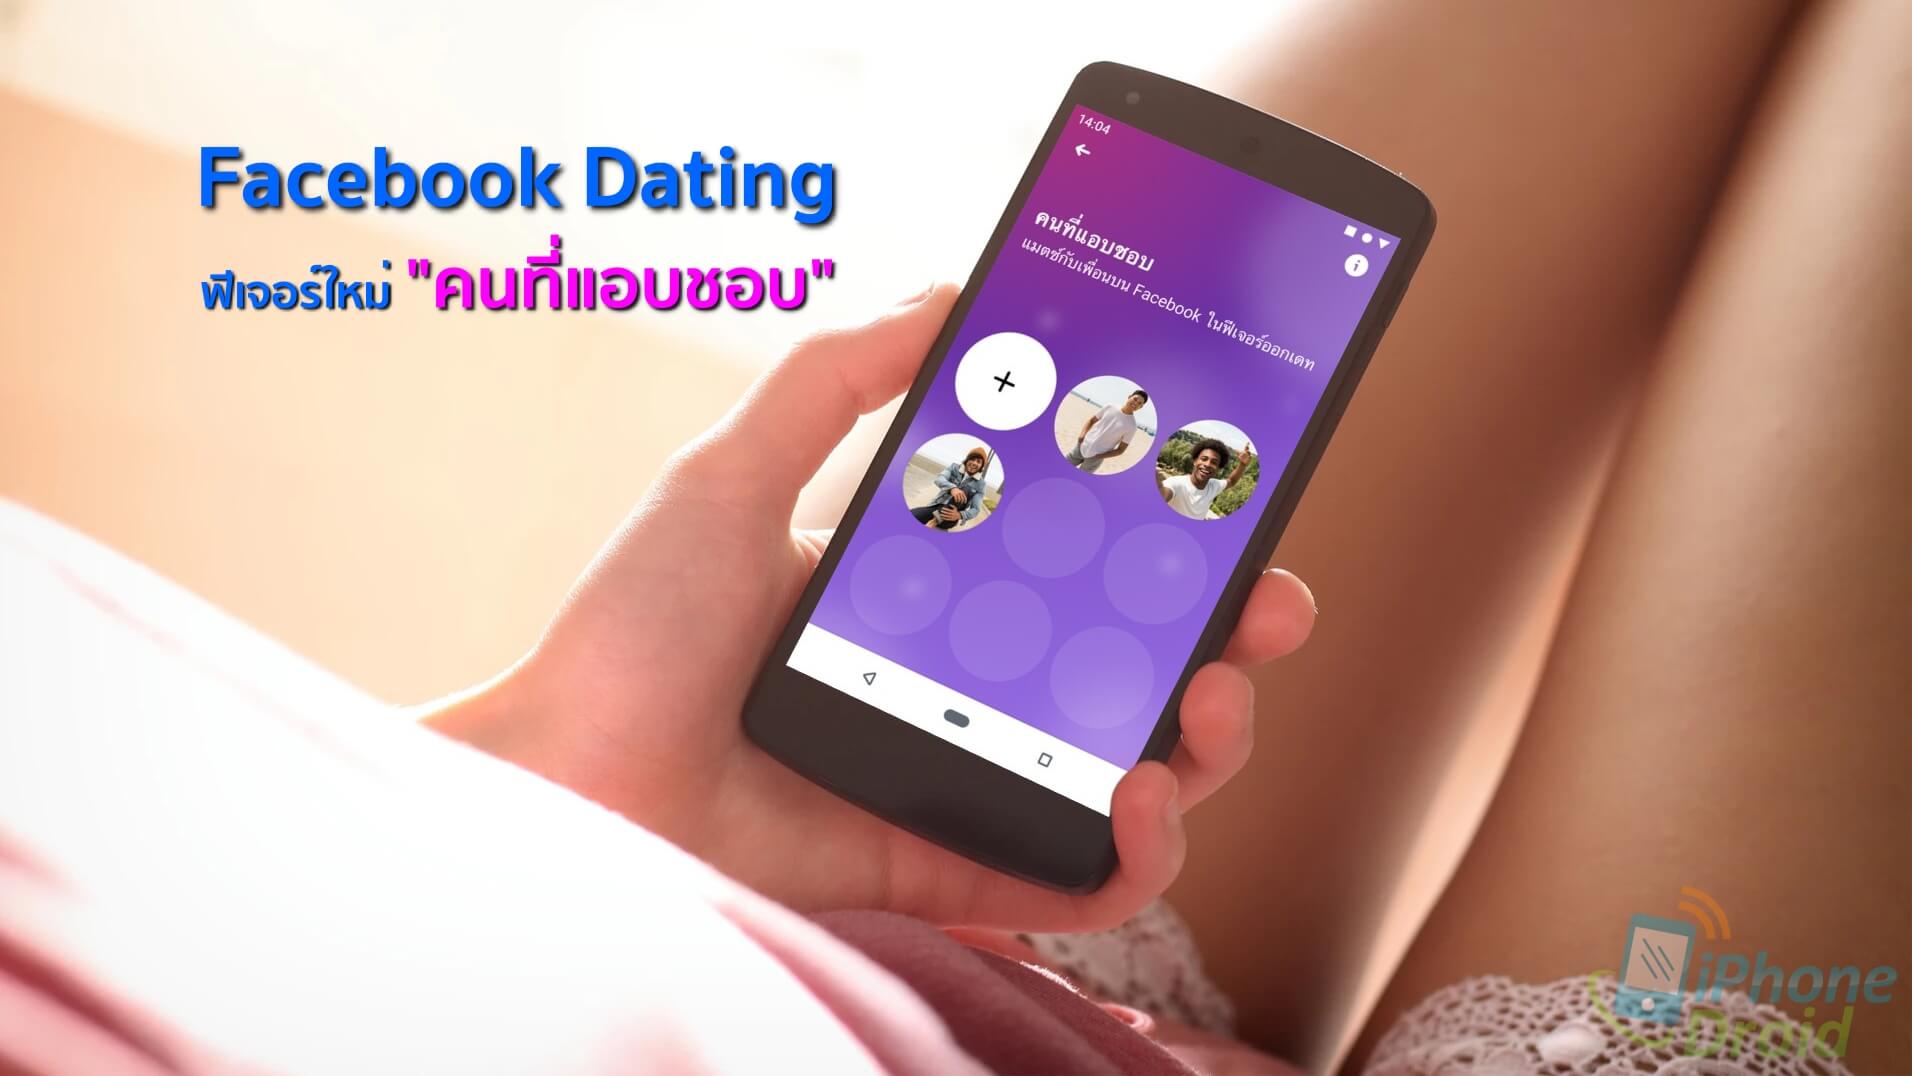 Facebook Dating Now Has a Secret Crush Feature